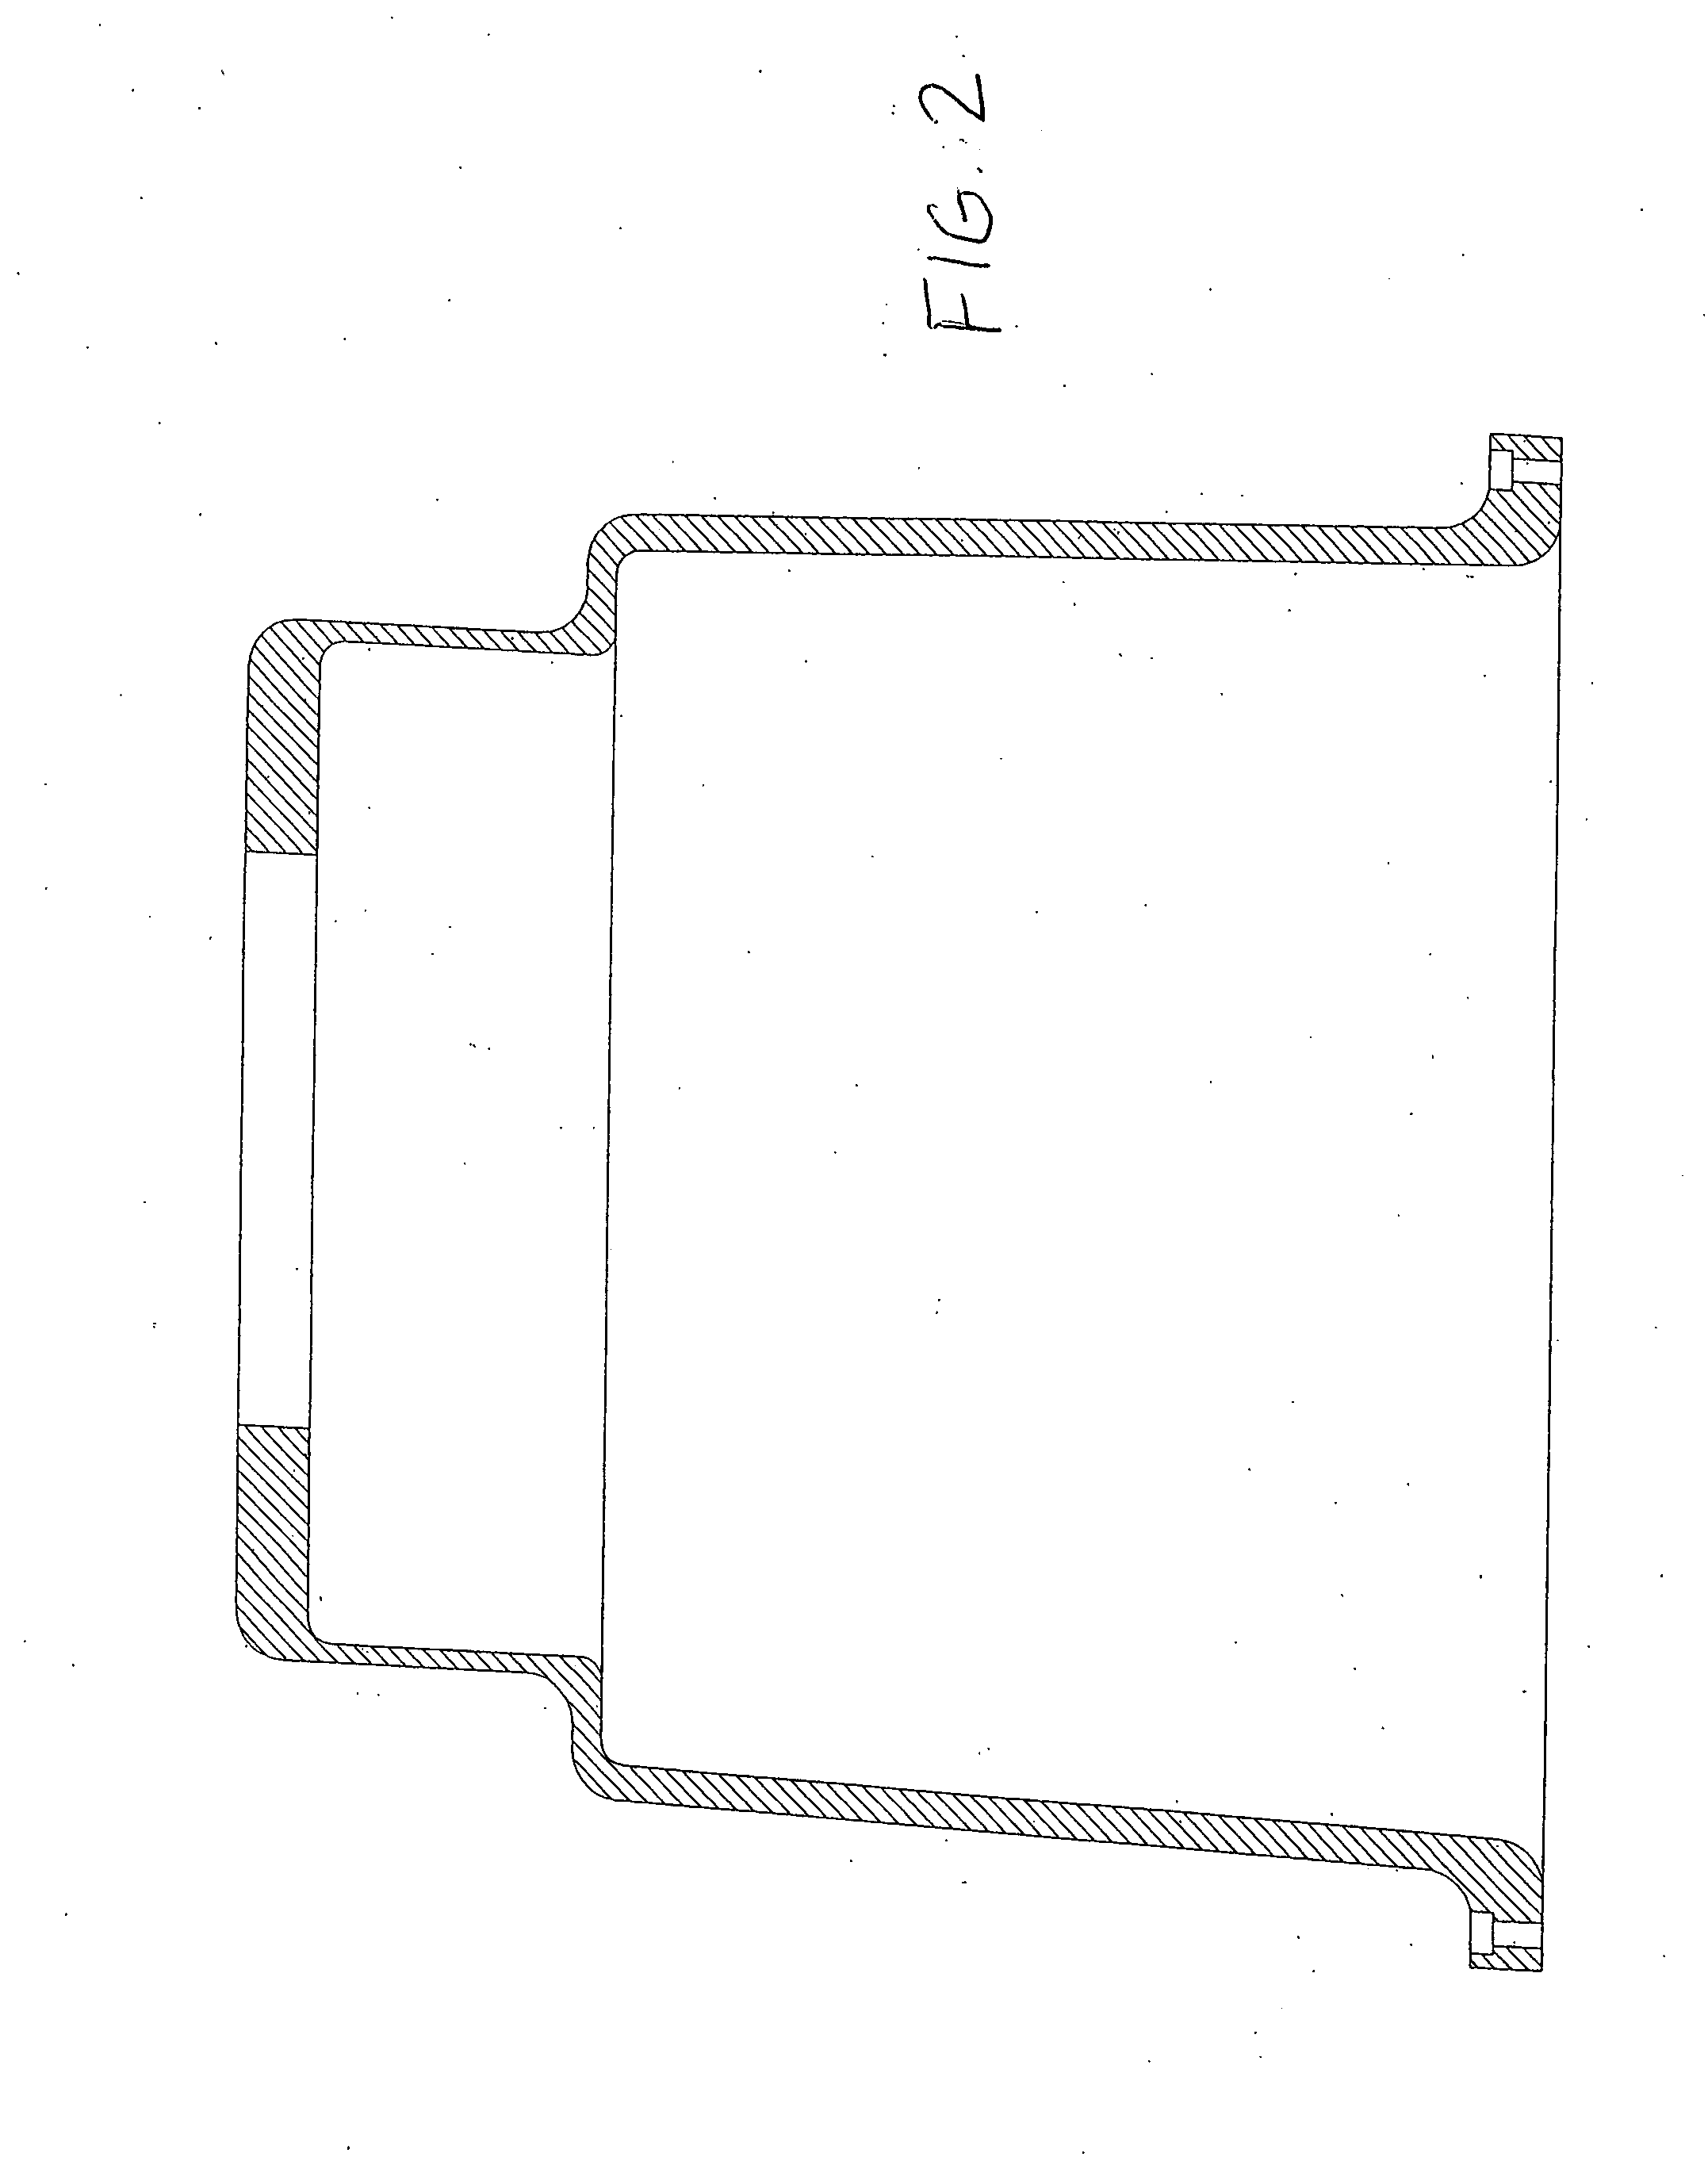 Lightweight rigid structural compositions with integral radiation shielding including lead-free structural compositions